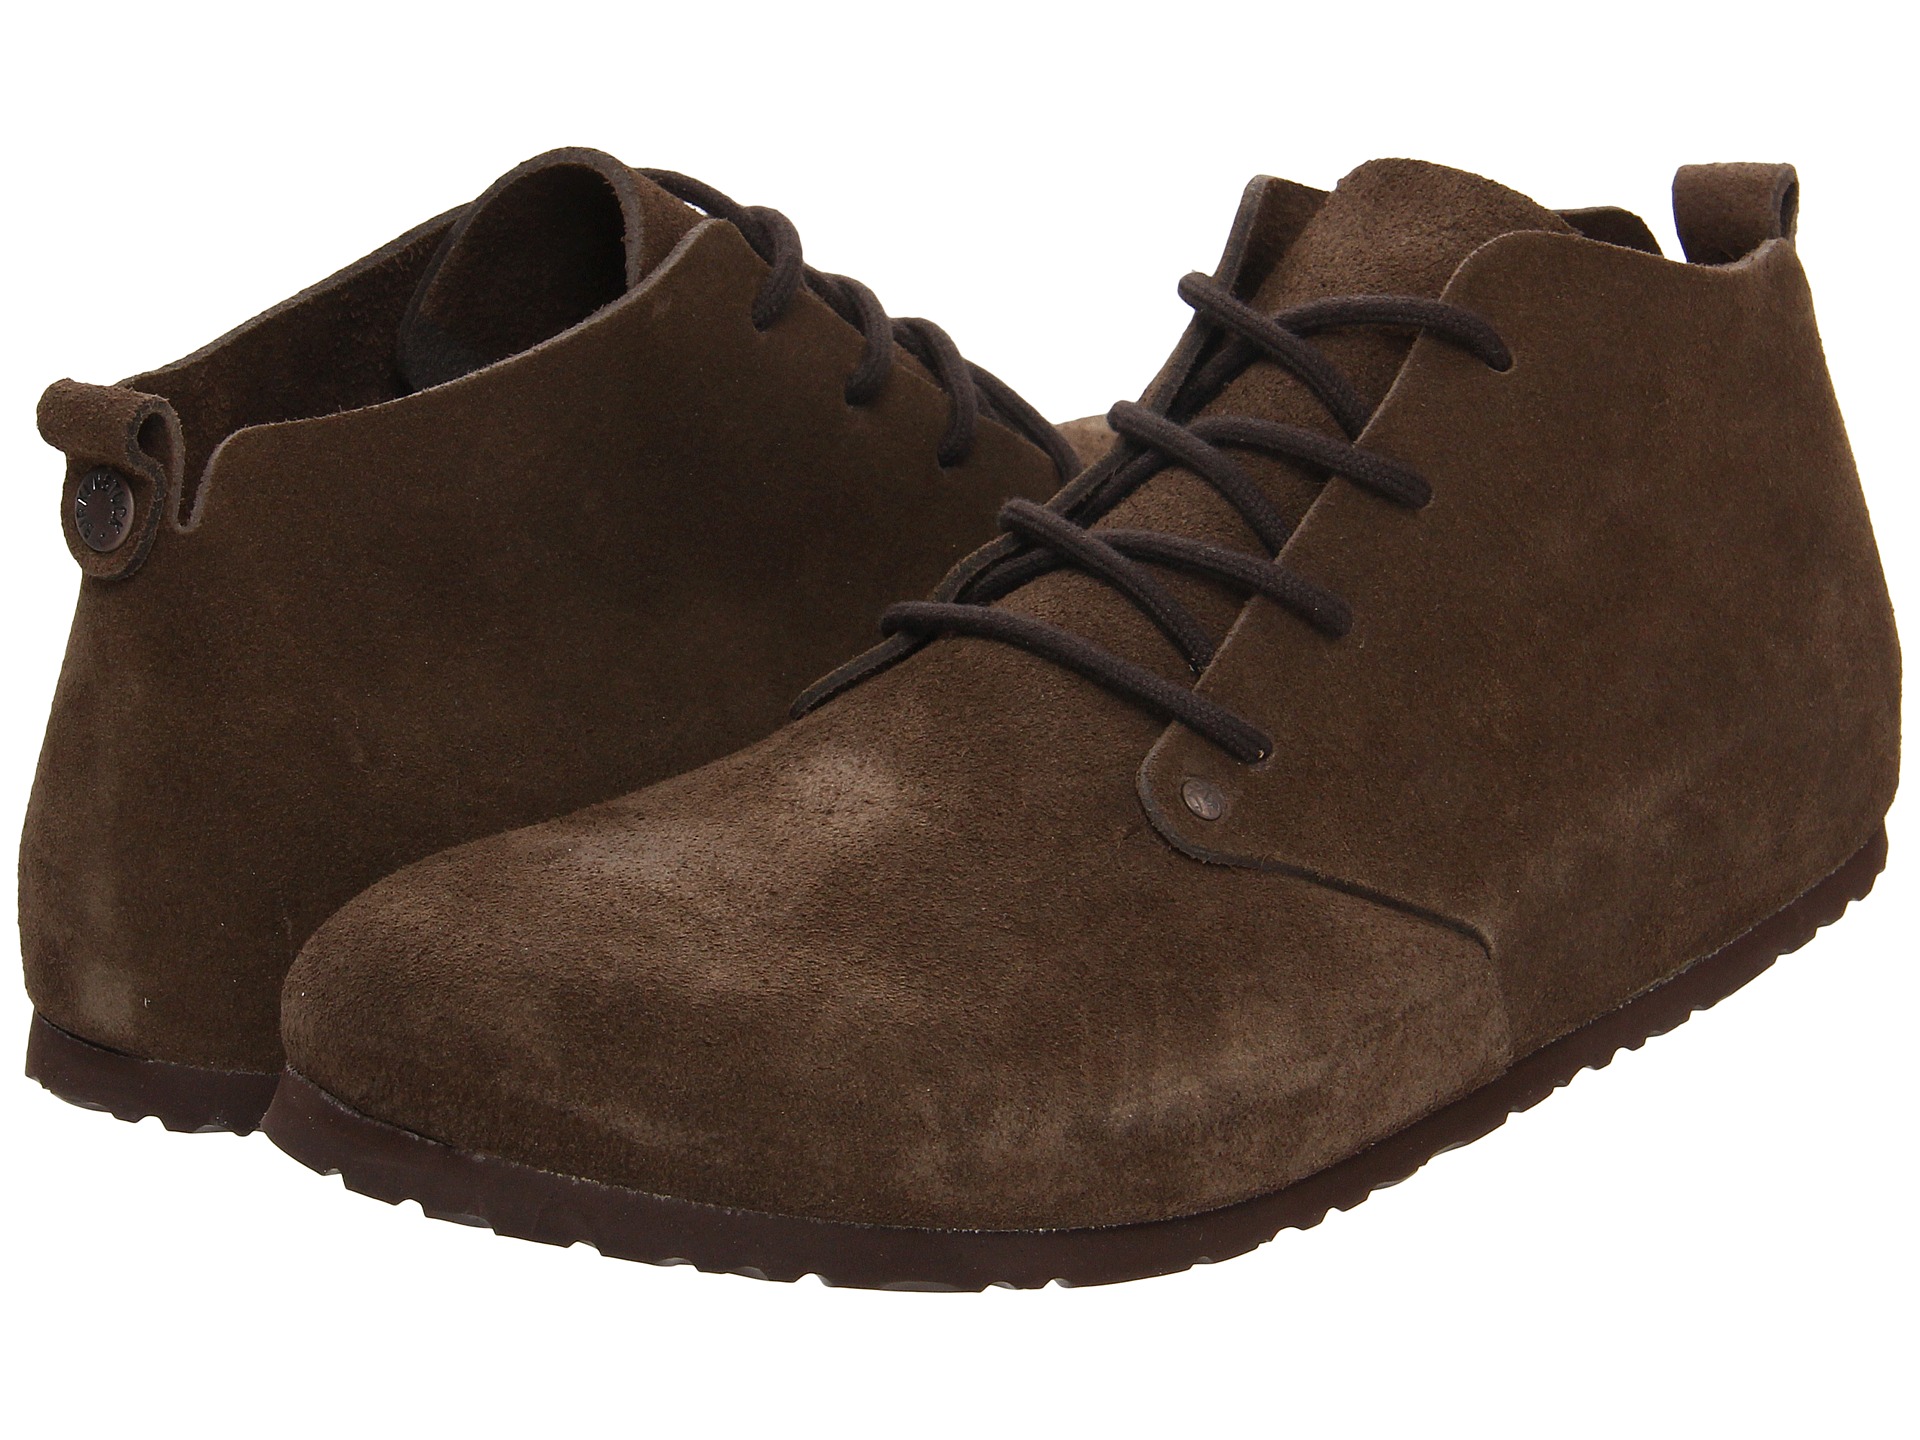 No results for birkenstock dundee mocha suede - Search Zappos